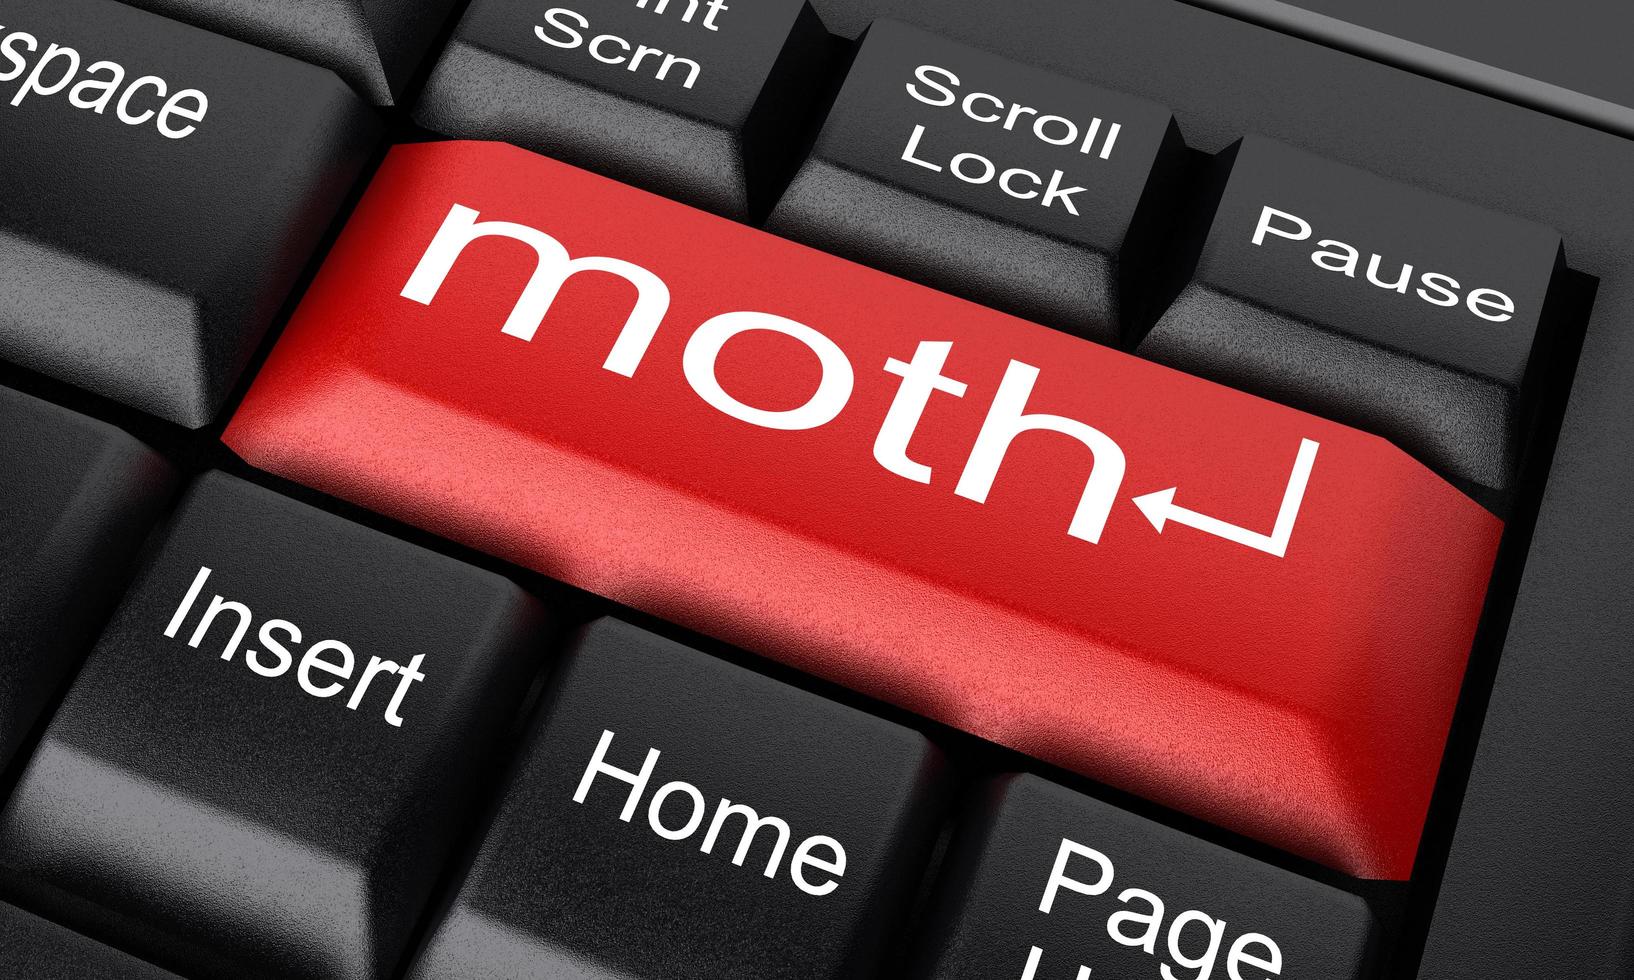 moth word on red keyboard button photo